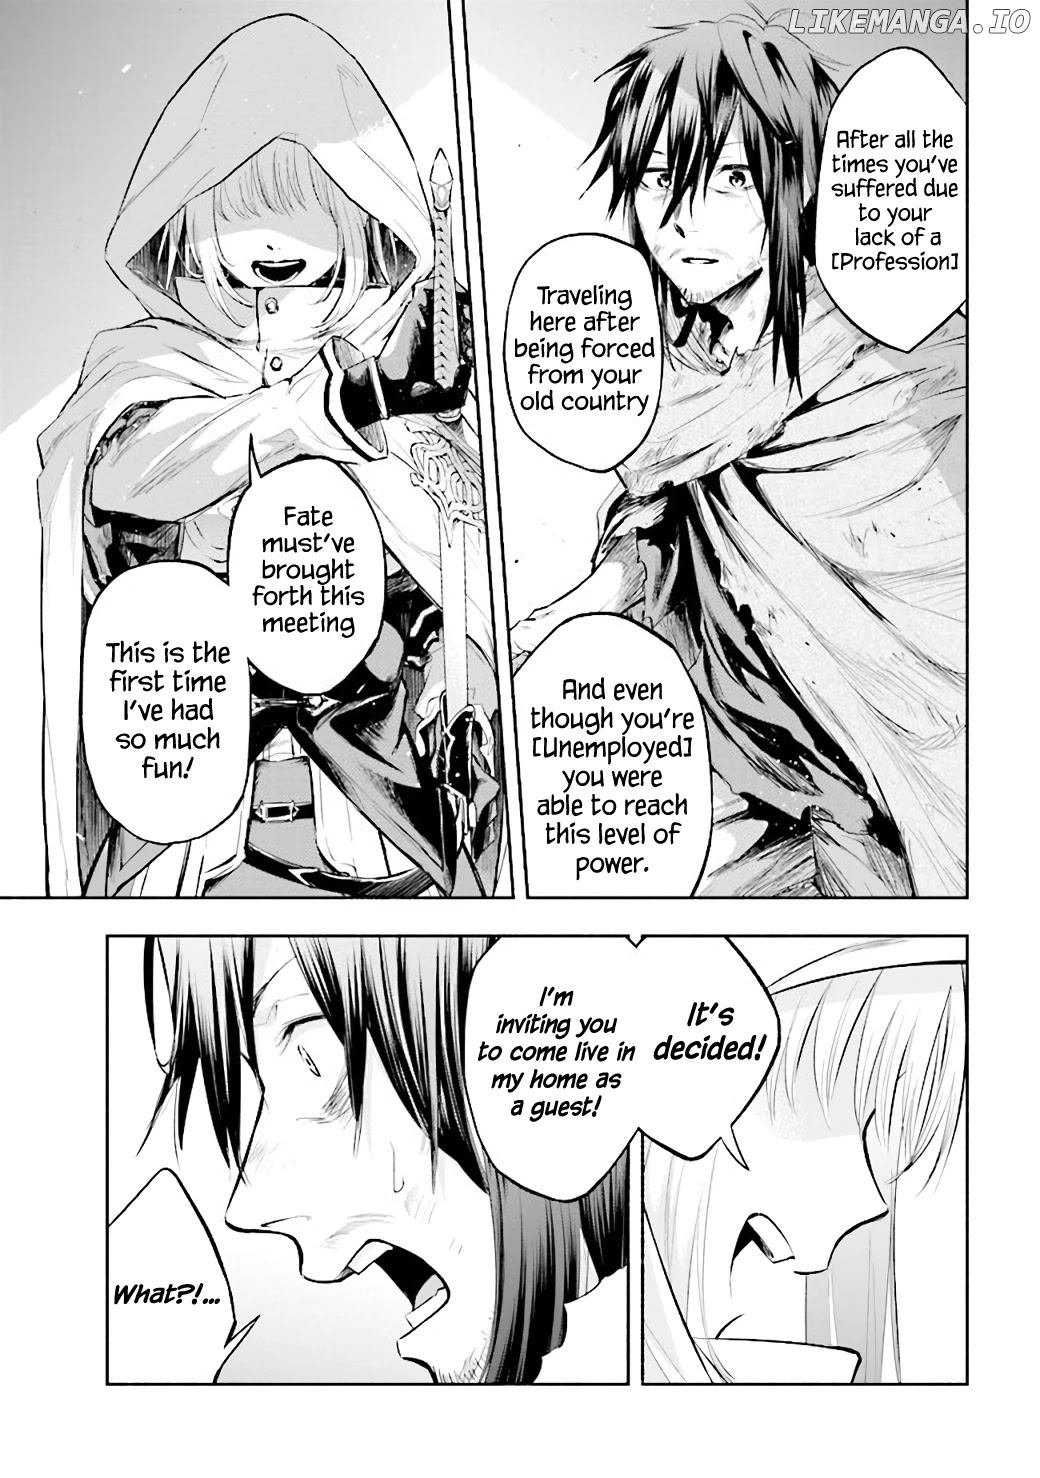 Story of an "Unemployed" Champion and a Princess Who Together Find Their Happiness chapter 0.1 - page 5